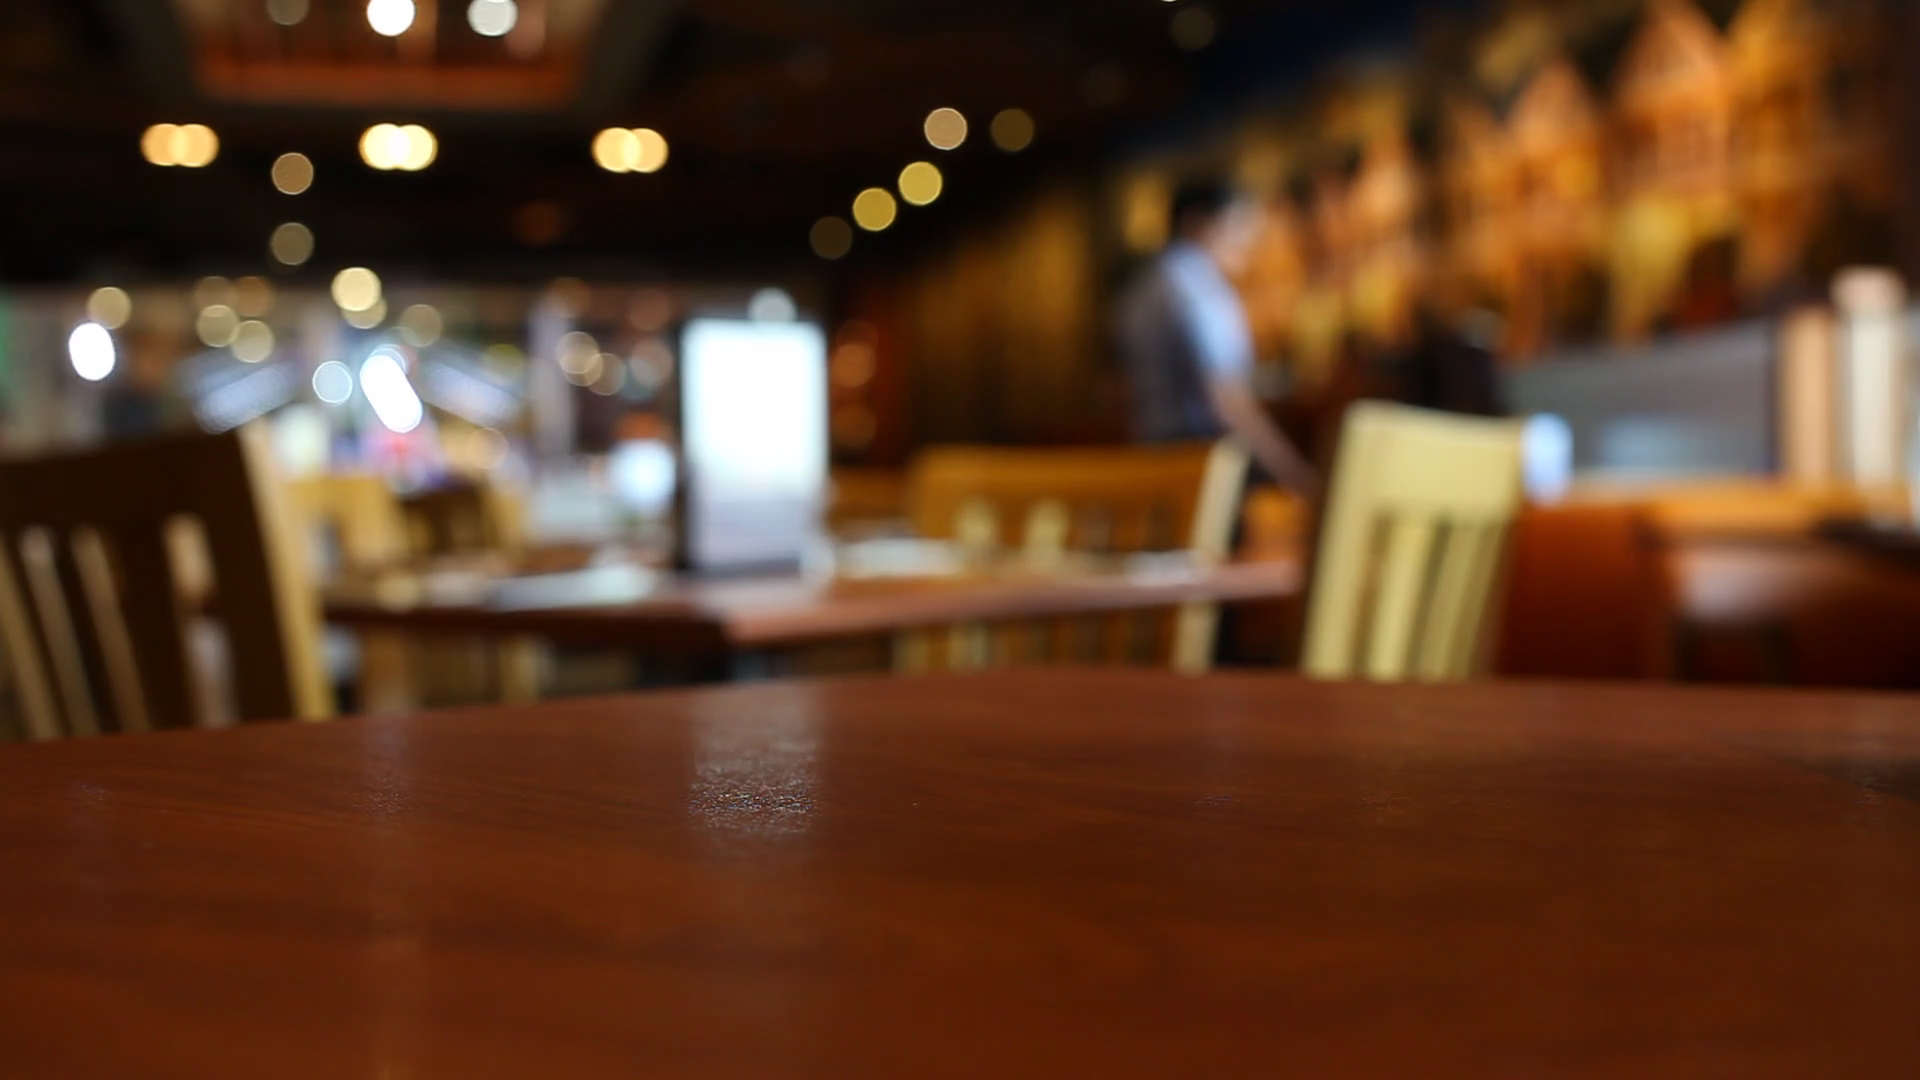 Table at restaurant blurred background Stock Video Footage - Videoblocks